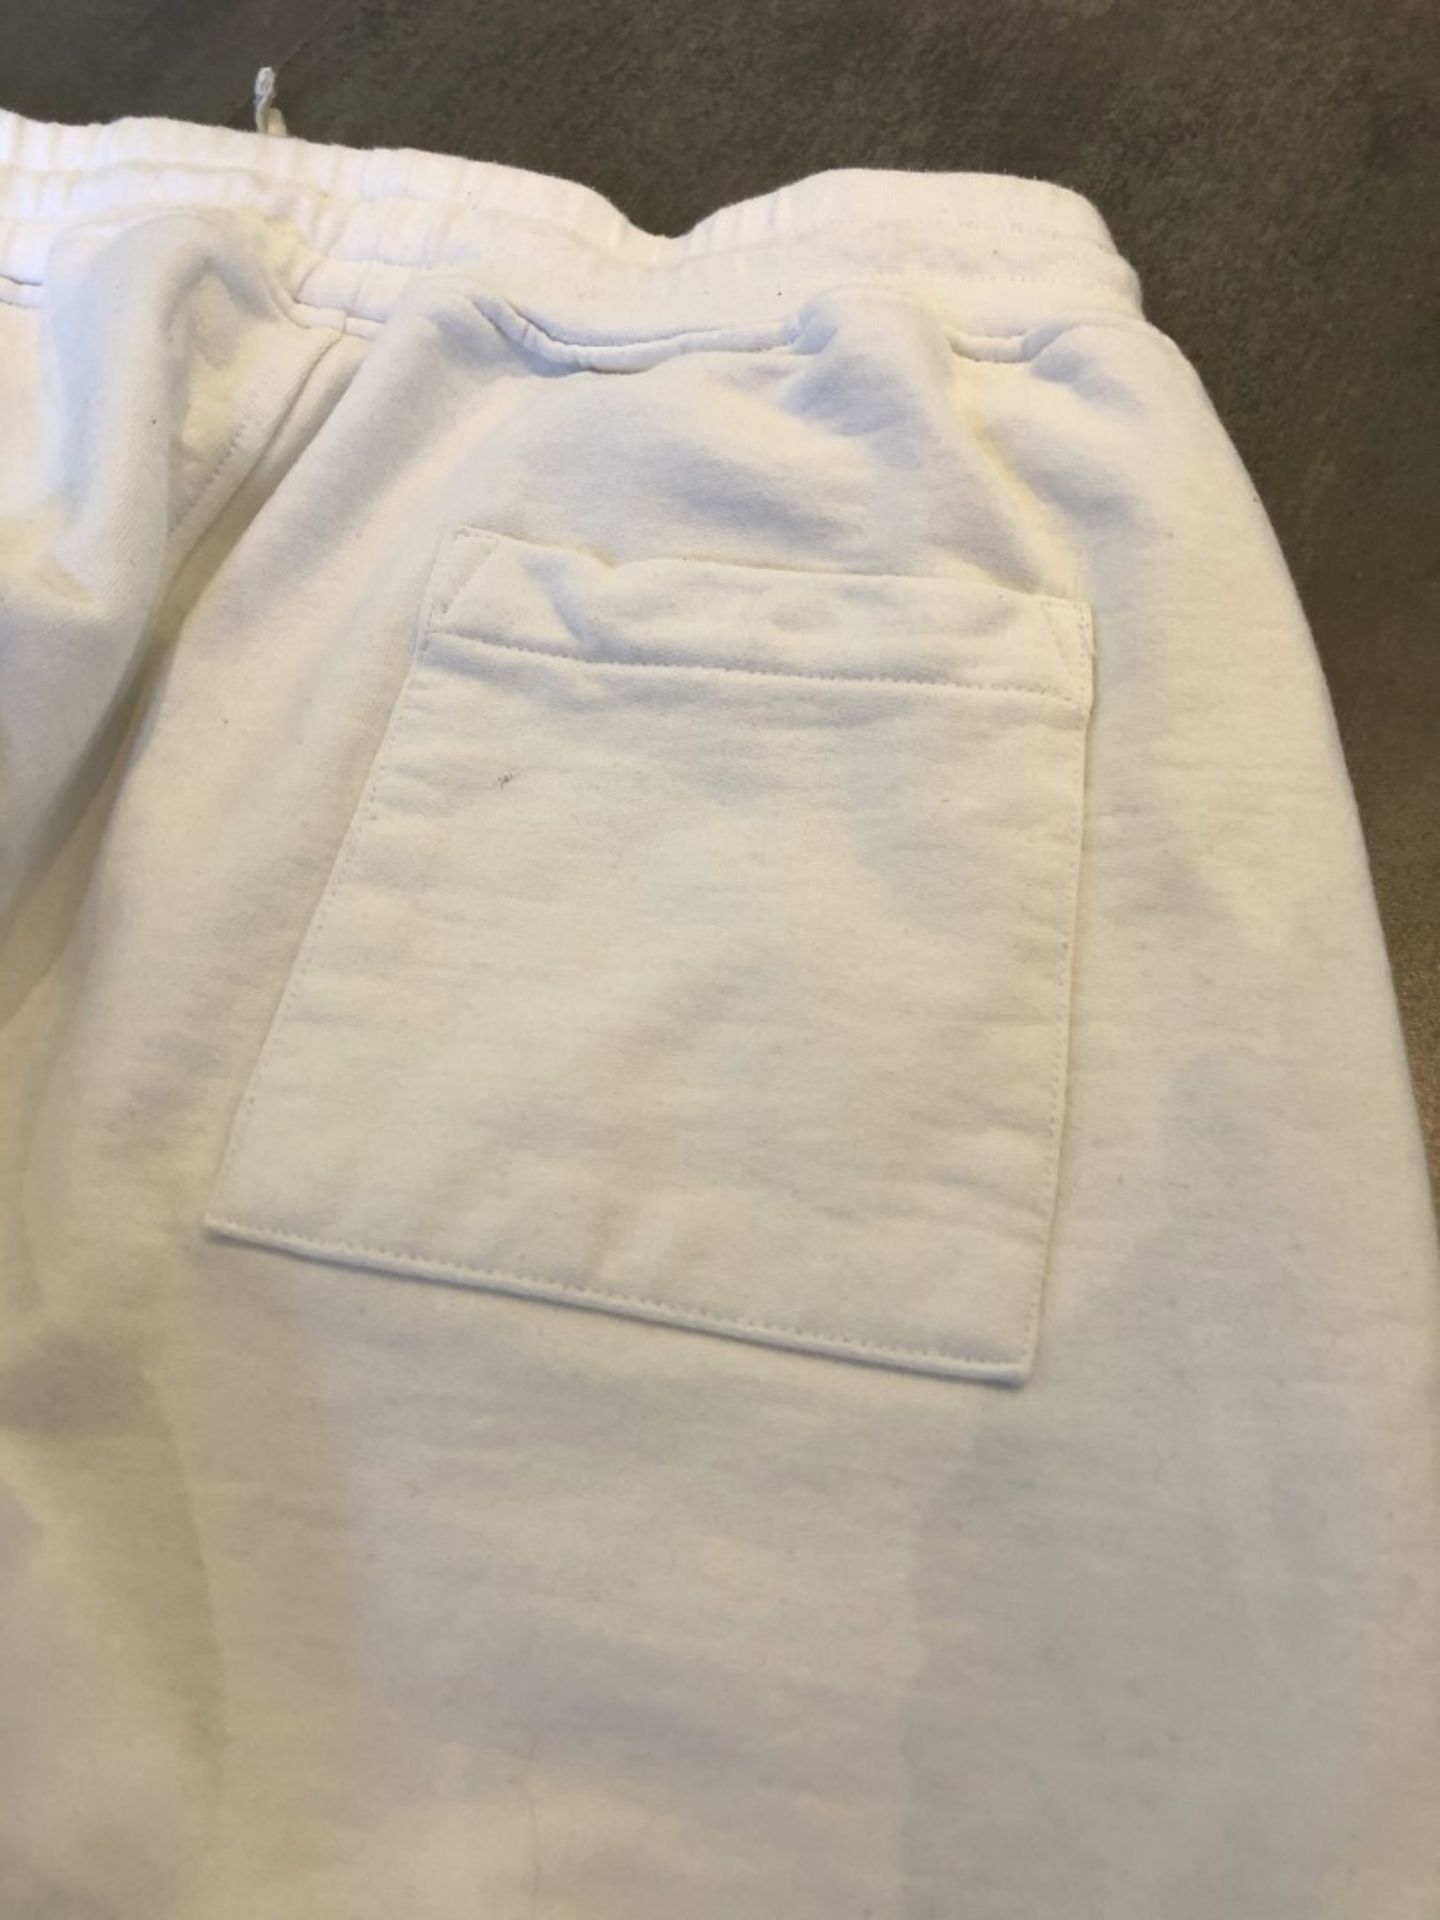 1 x Pair Of Men's Genuine Casablanca Tracksuit Bottoms In White - Size (EU/UK): L/L - Preowned - - Image 5 of 6